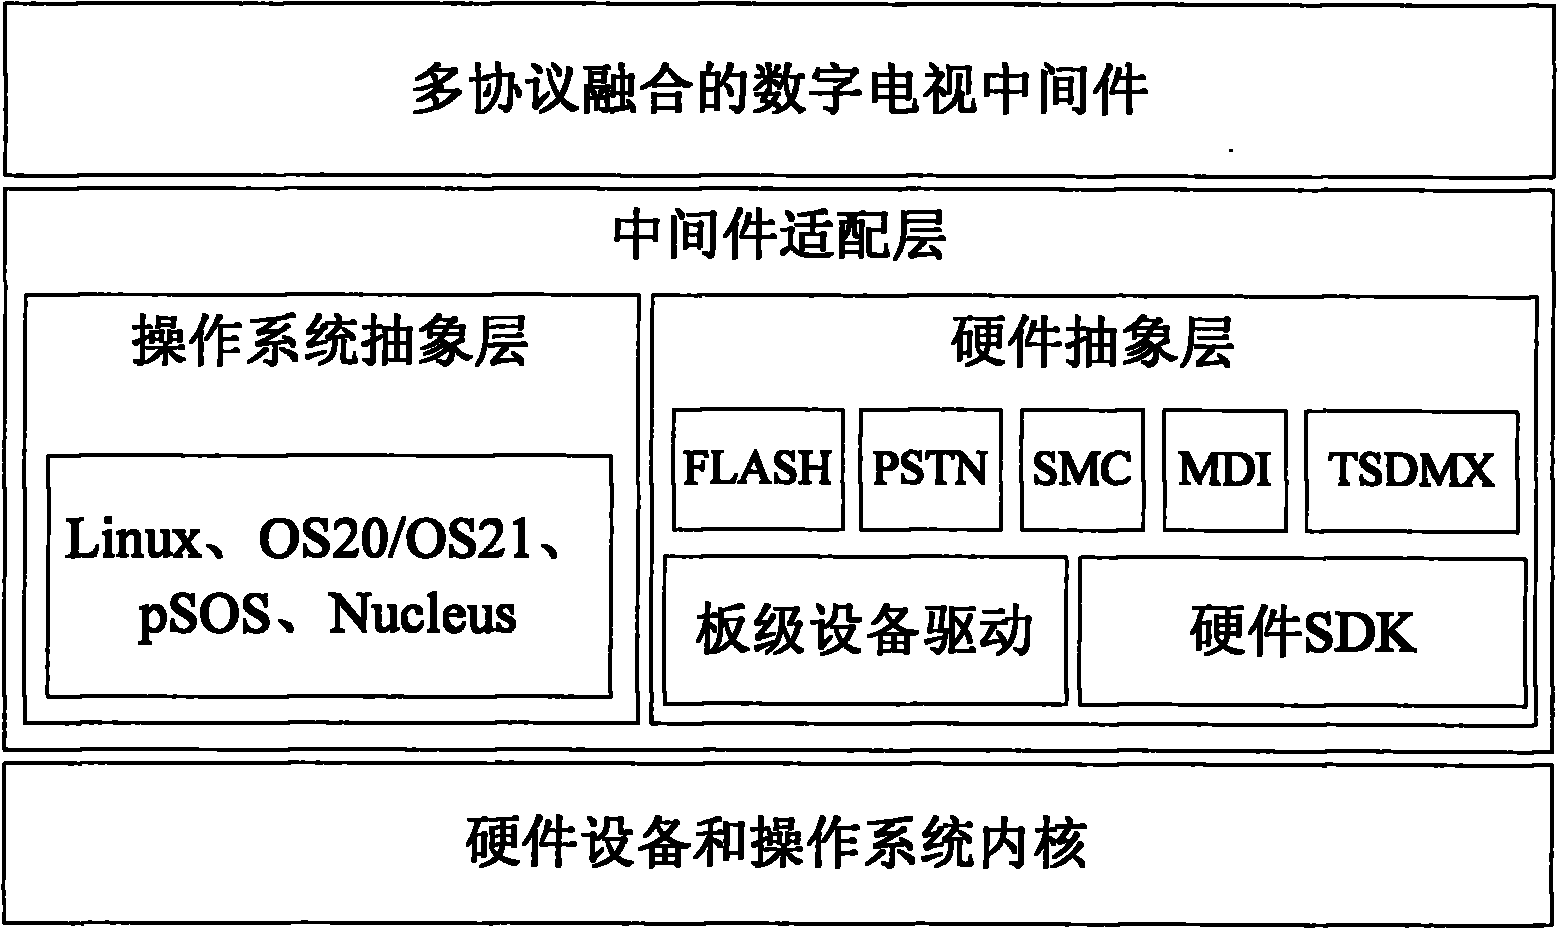 General middleware adaptation layer system for digital television